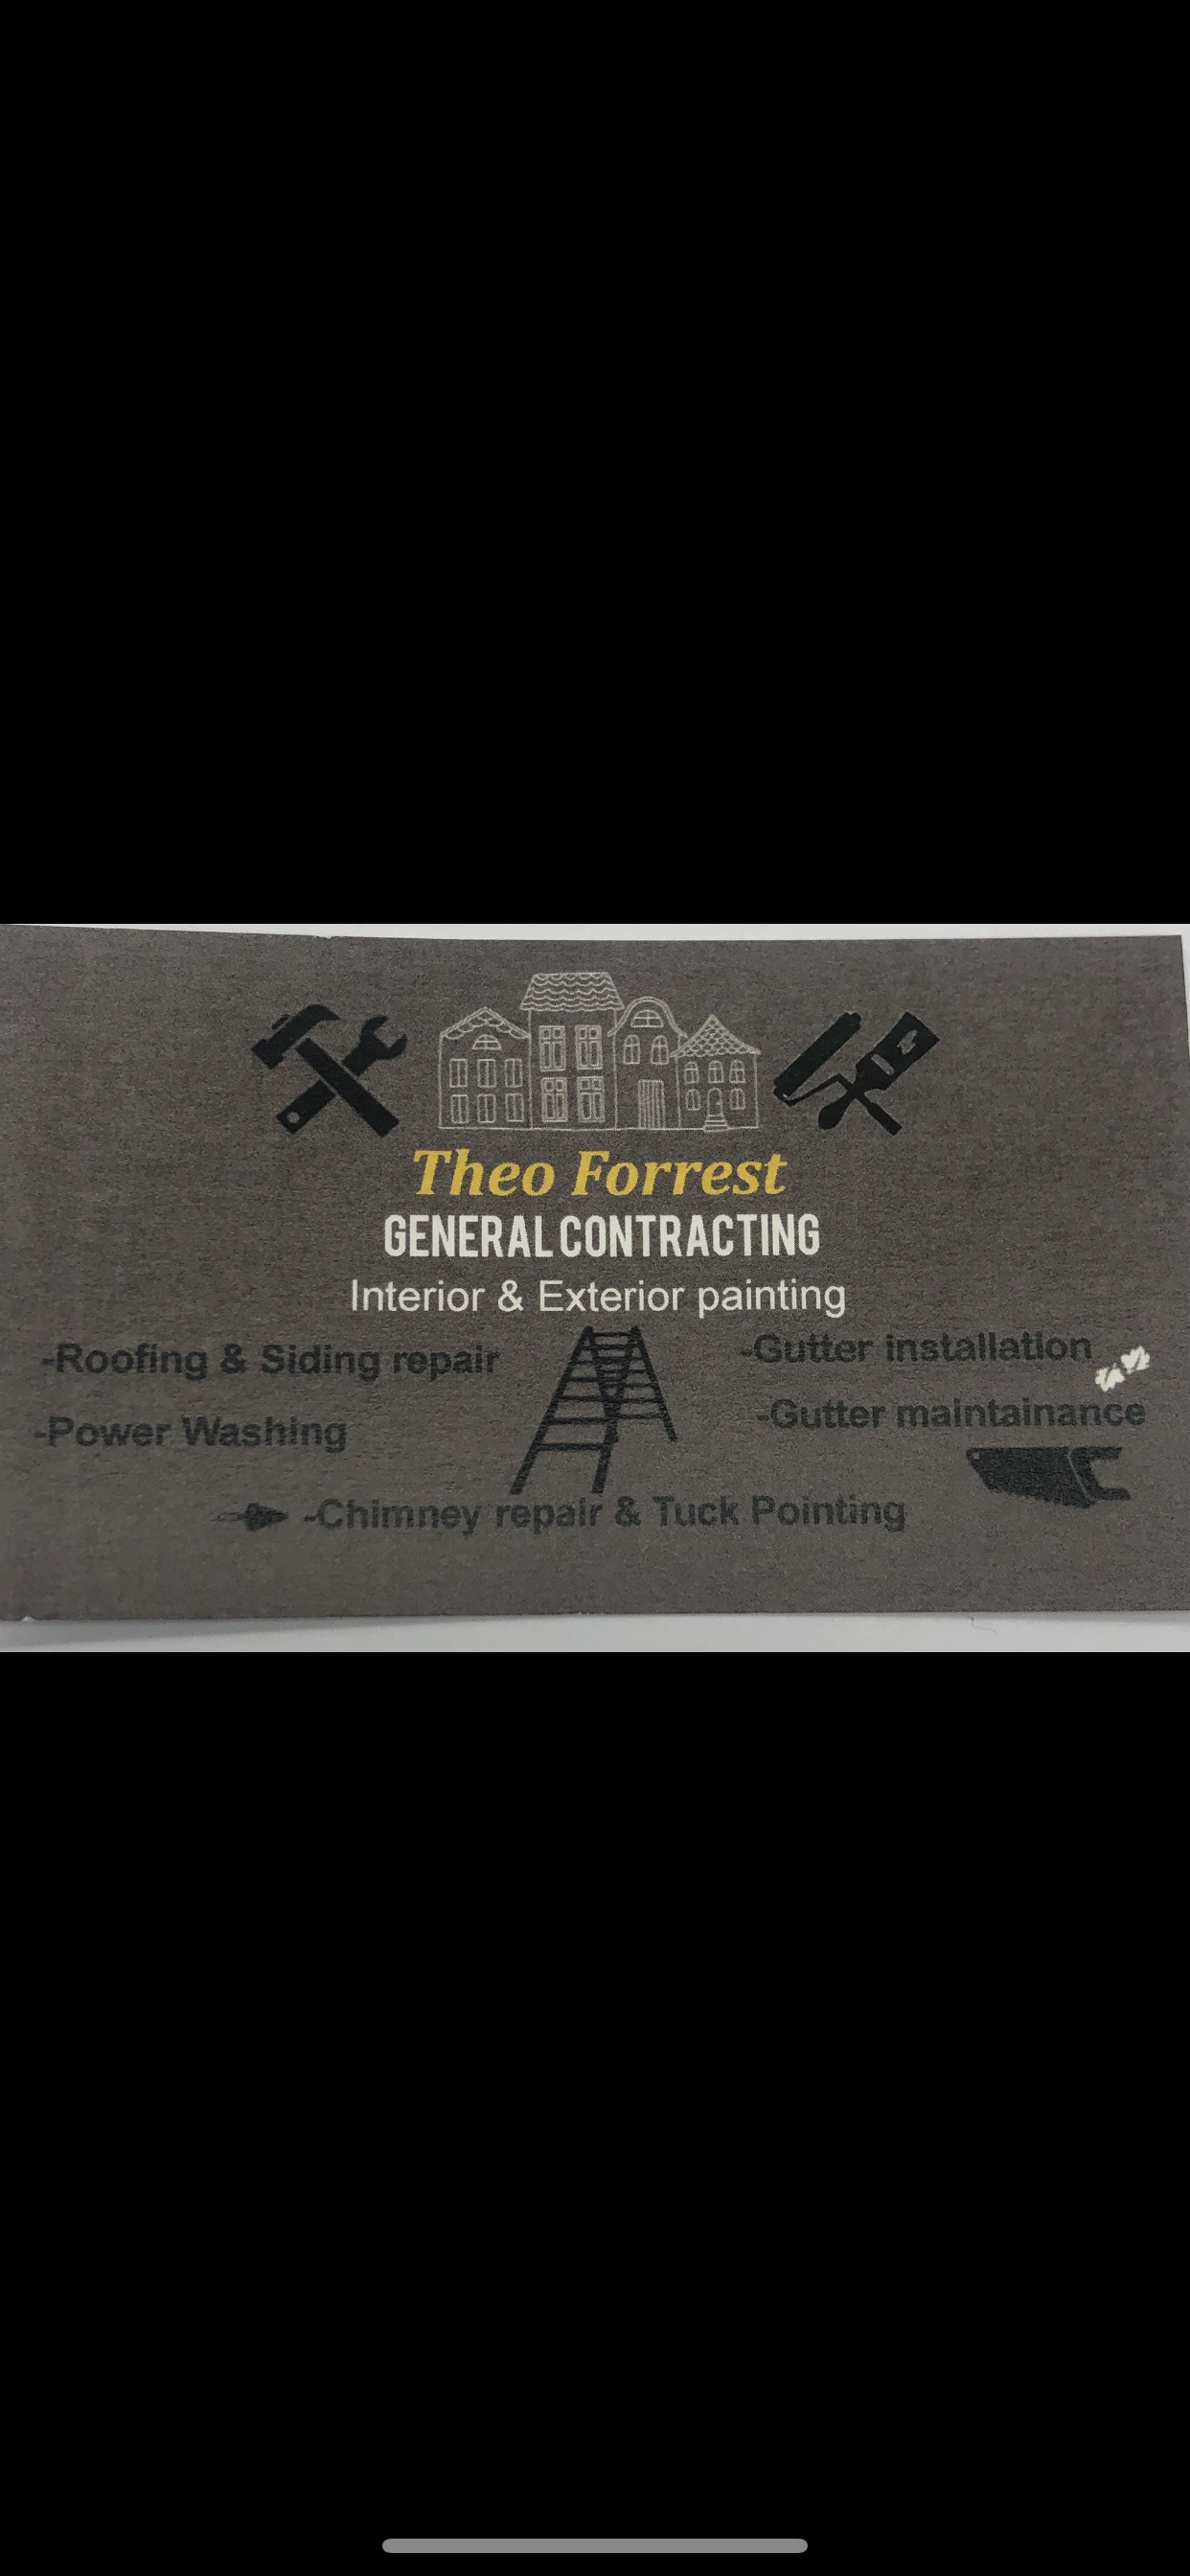 Theo Forrest General Contracting Logo